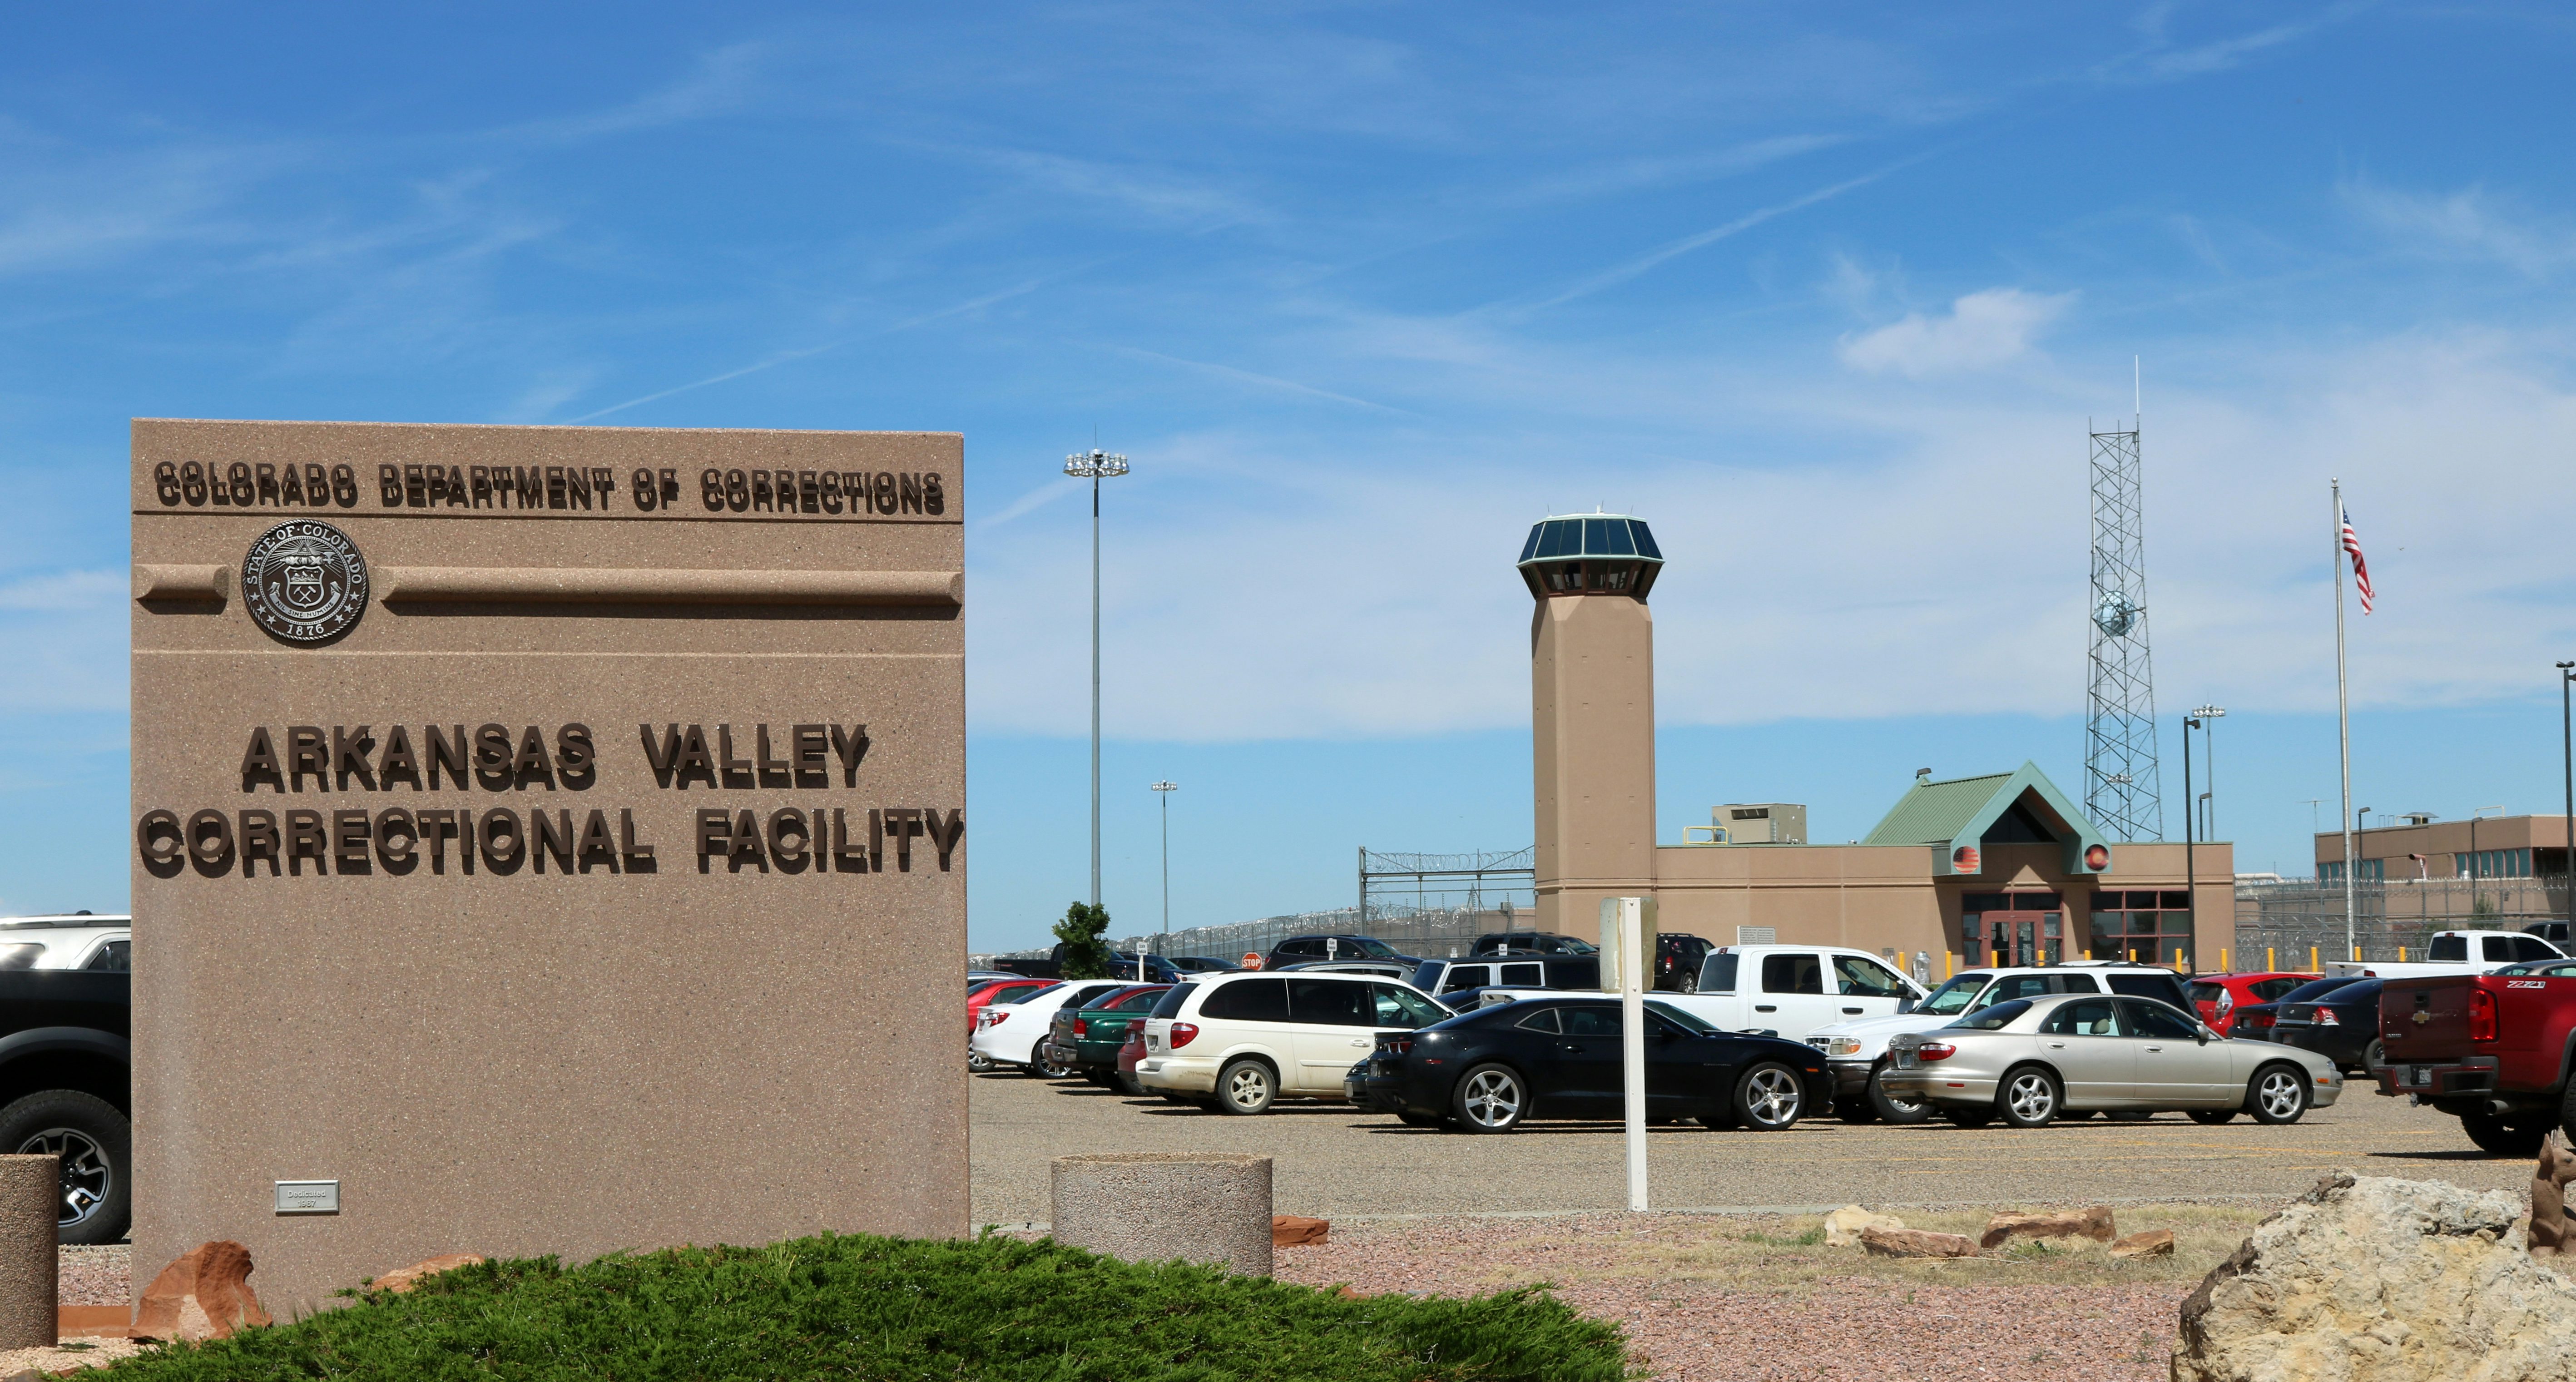 Arkansas Valley Correctional Facility These Are The Best Cannabis Strains for ADHD/ ADD